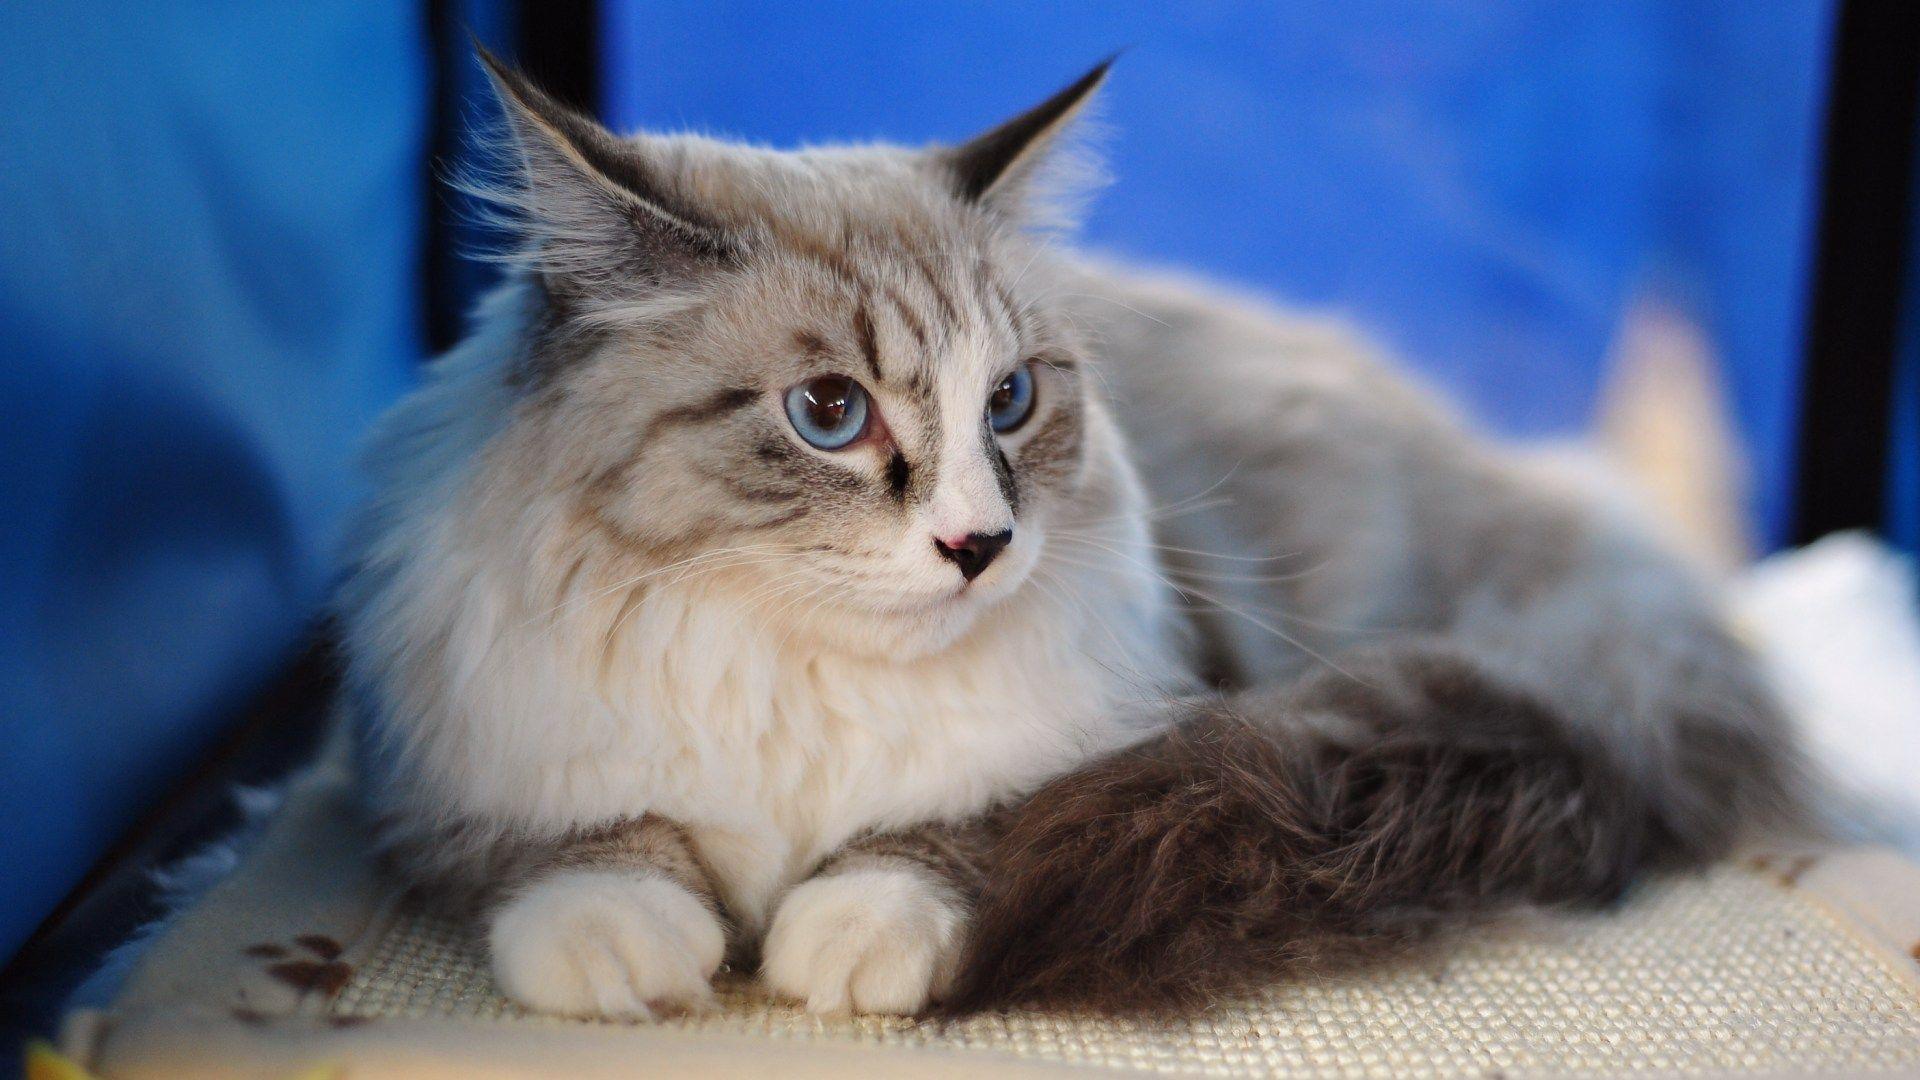 Surprising Maine Coon Cat Wallpaper Full HD 4134x2756PX